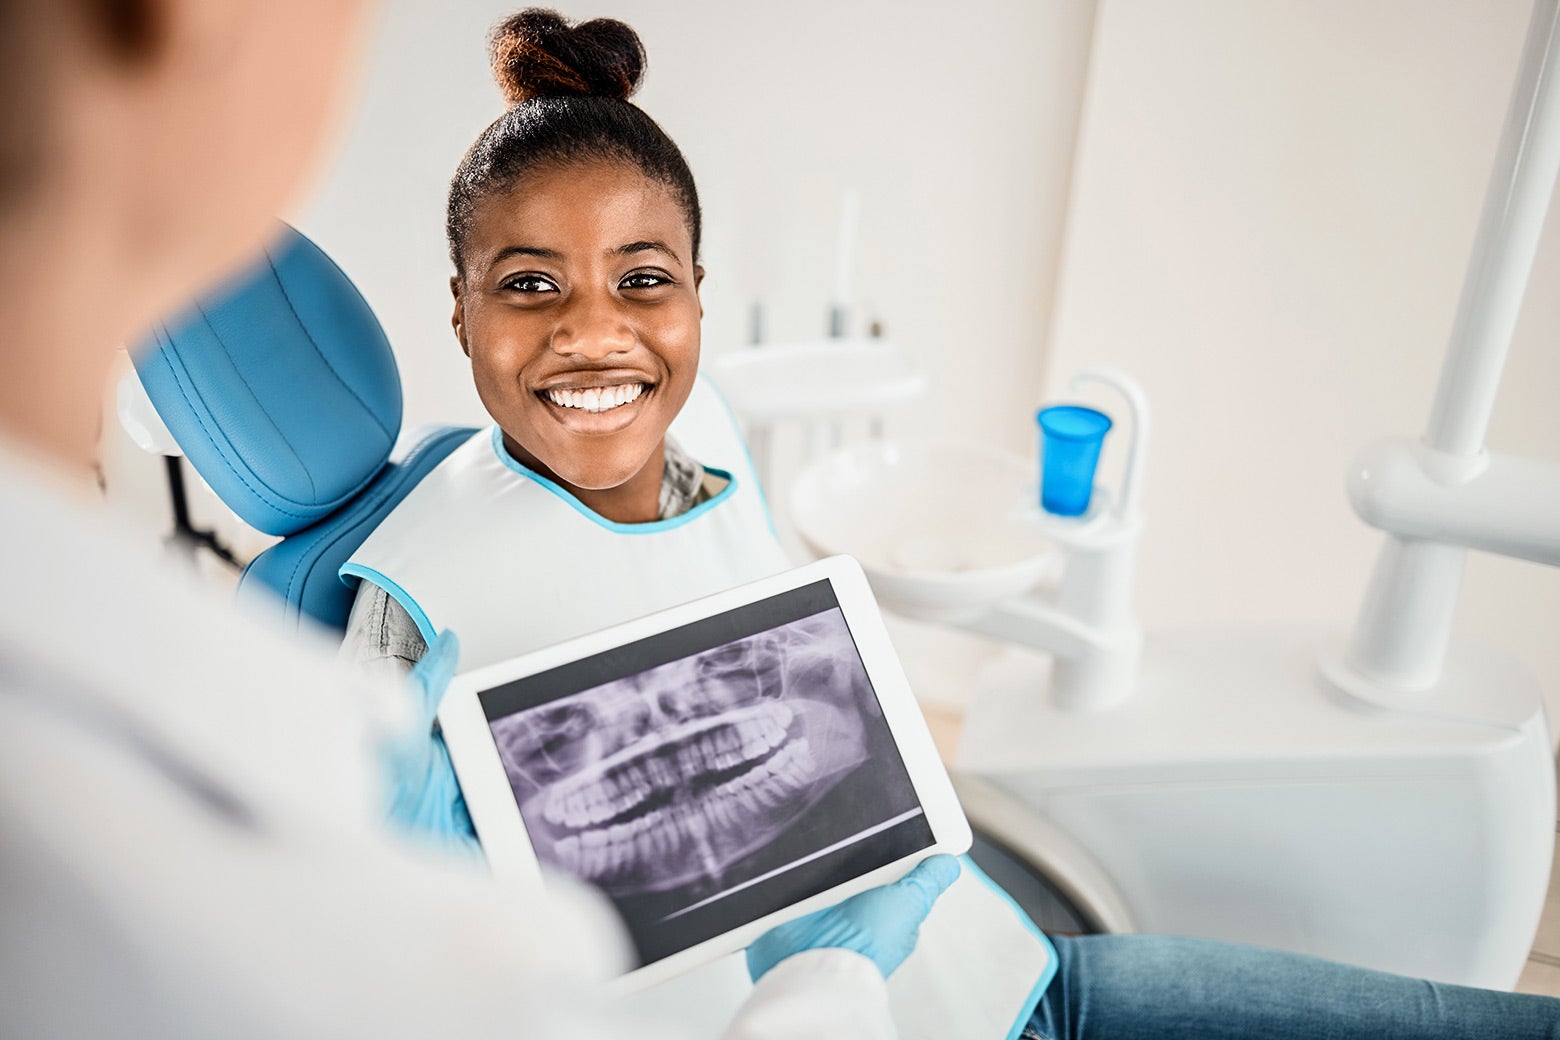 A young woman smiles while seated in a dentist's chair as a dental professional looks at her x-rays.